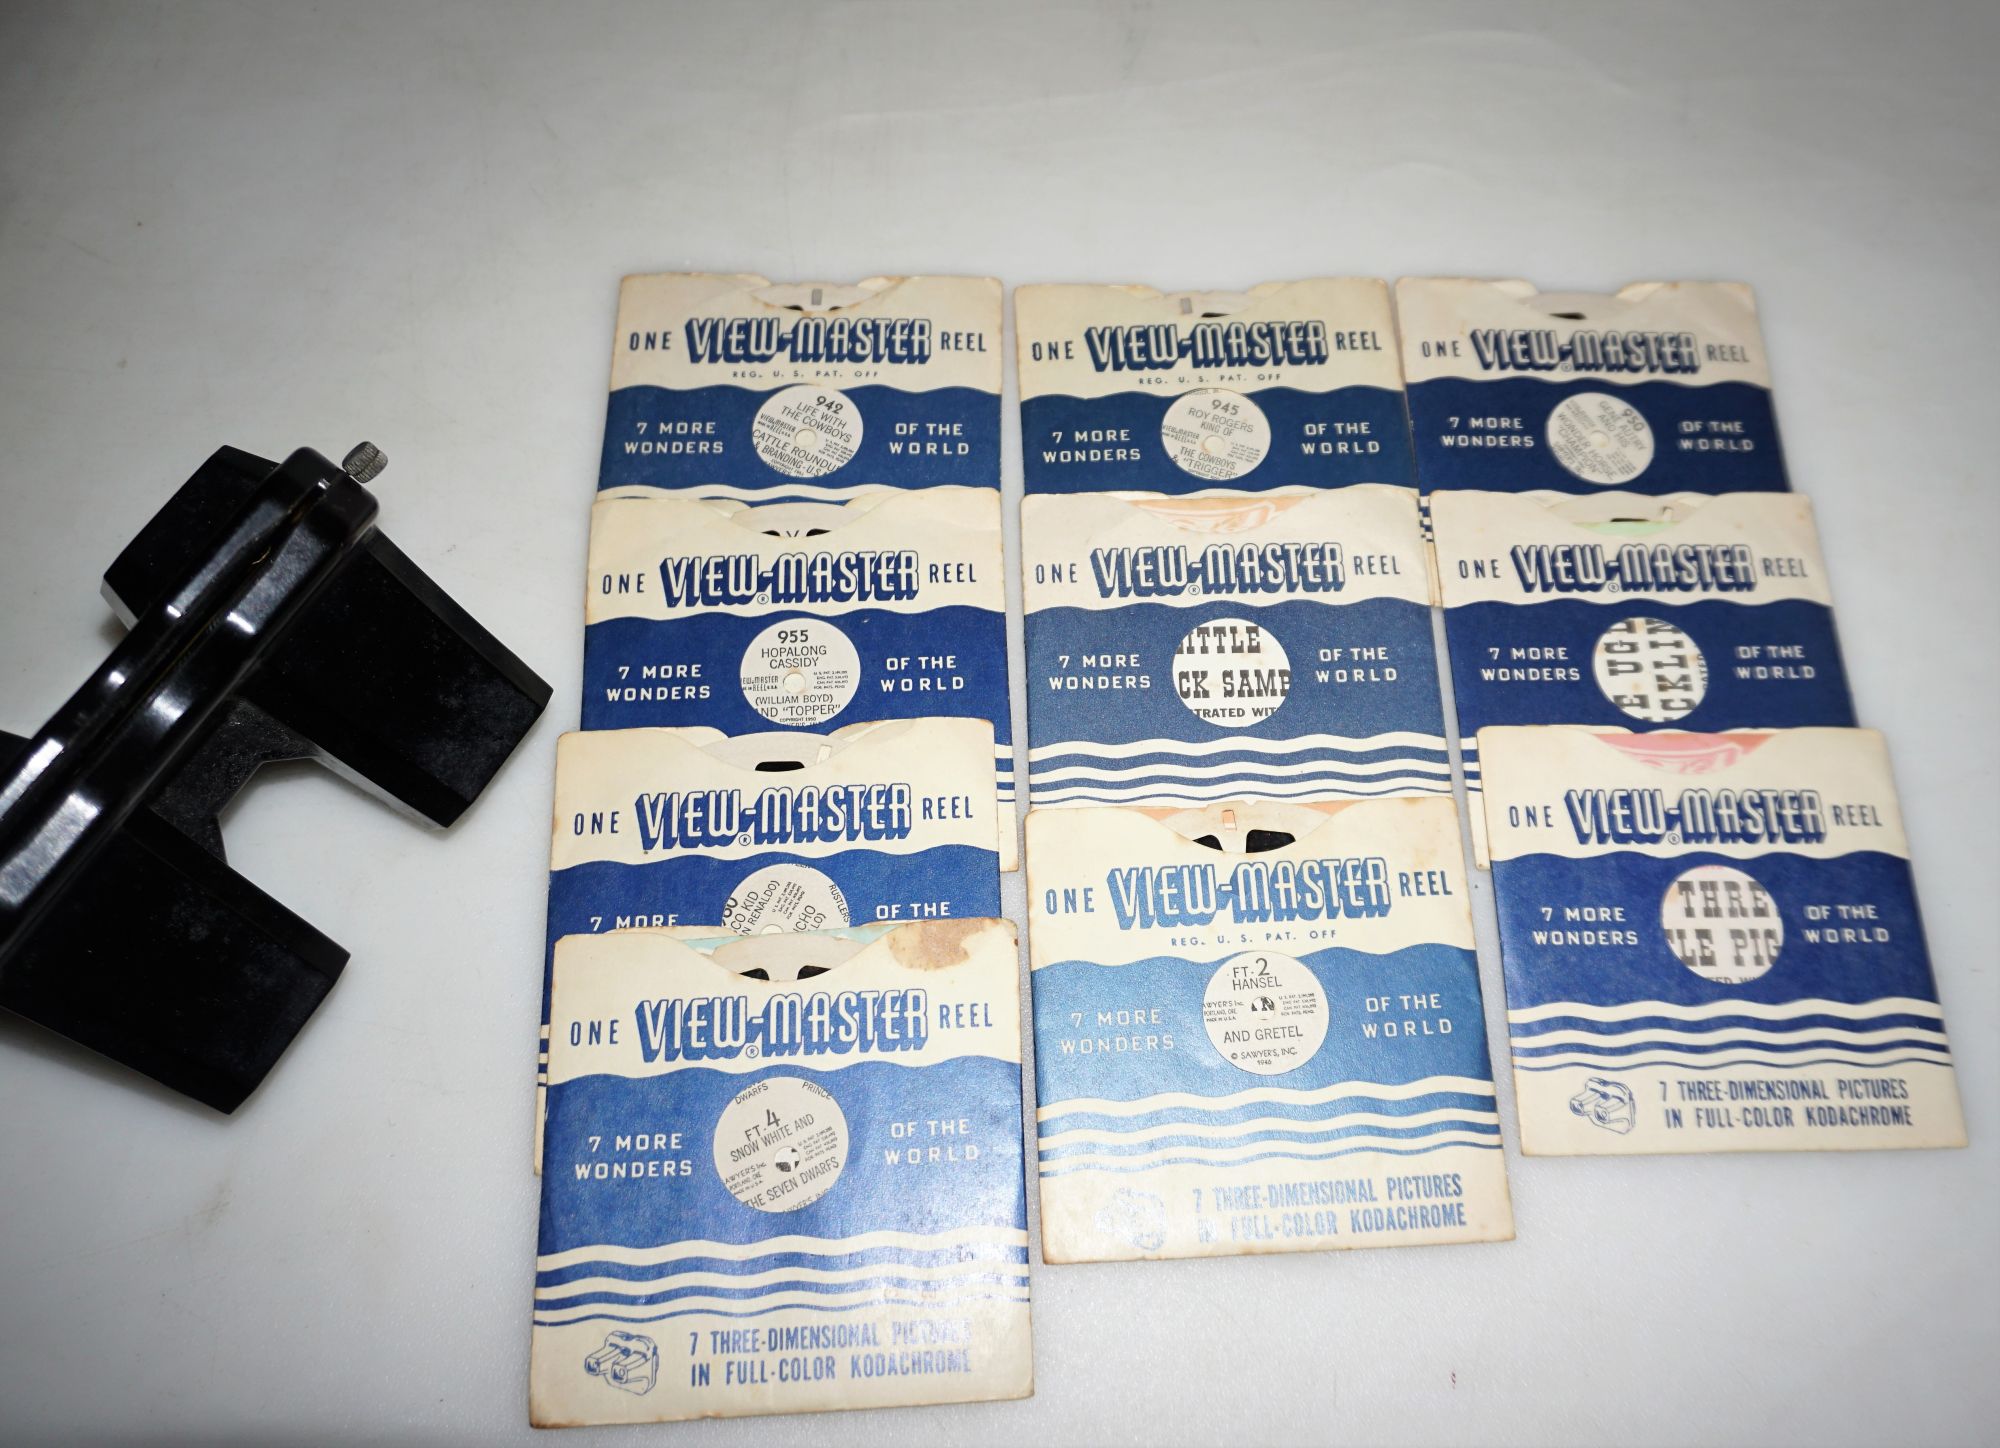 Sawyers, Toys, Sawyers Vintage 2 Viewmaster Bakelite Viewmaster Set And Reels  Lot